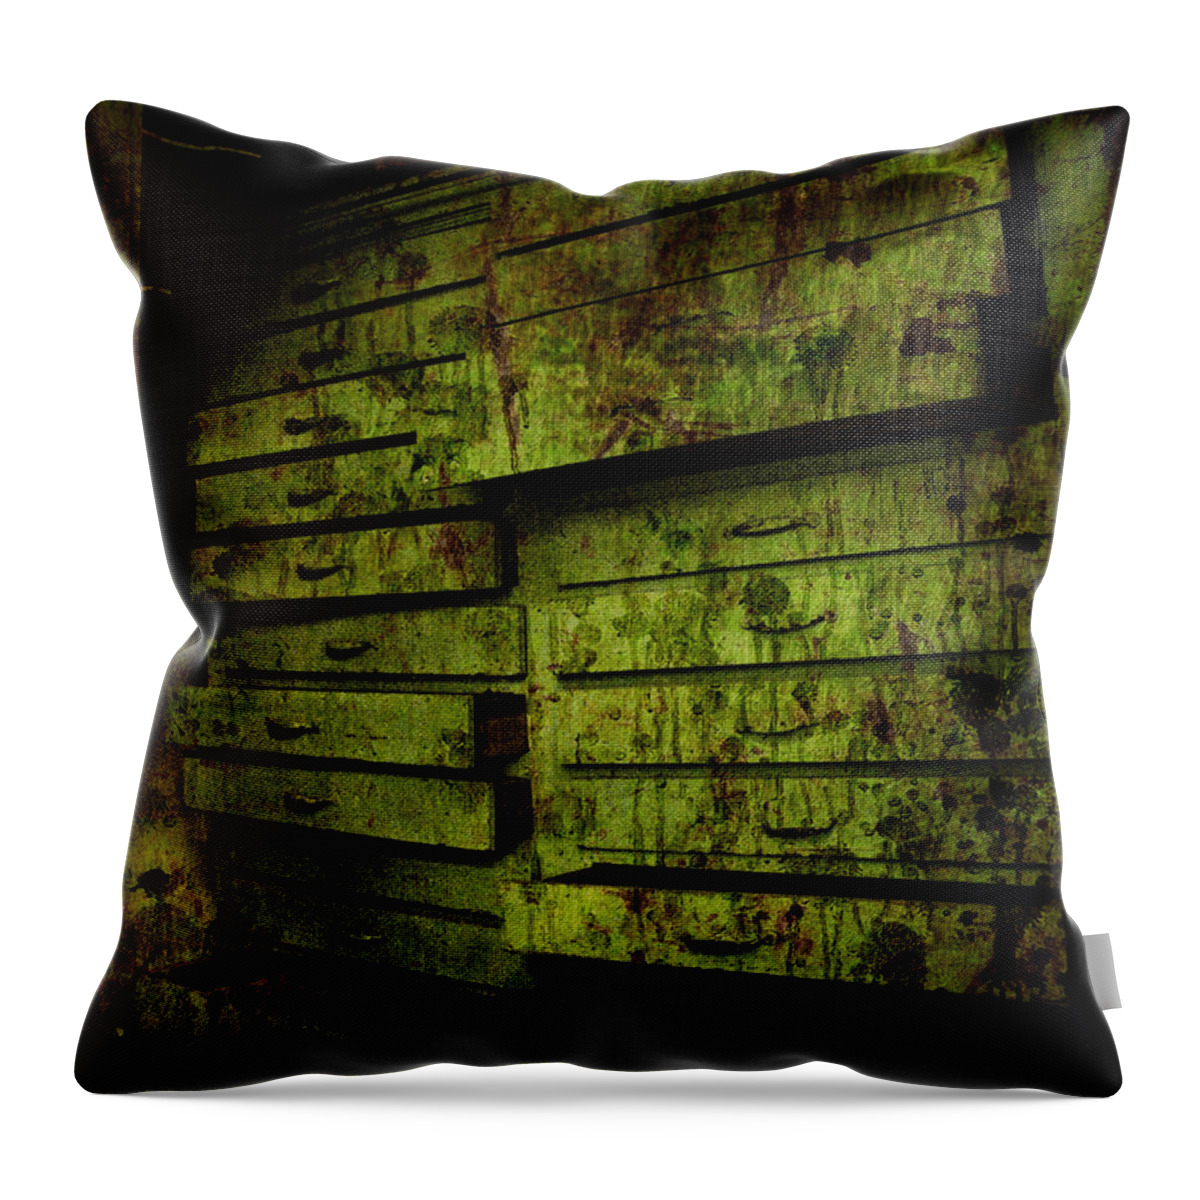 File Throw Pillow featuring the photograph The System by Jessica Brawley